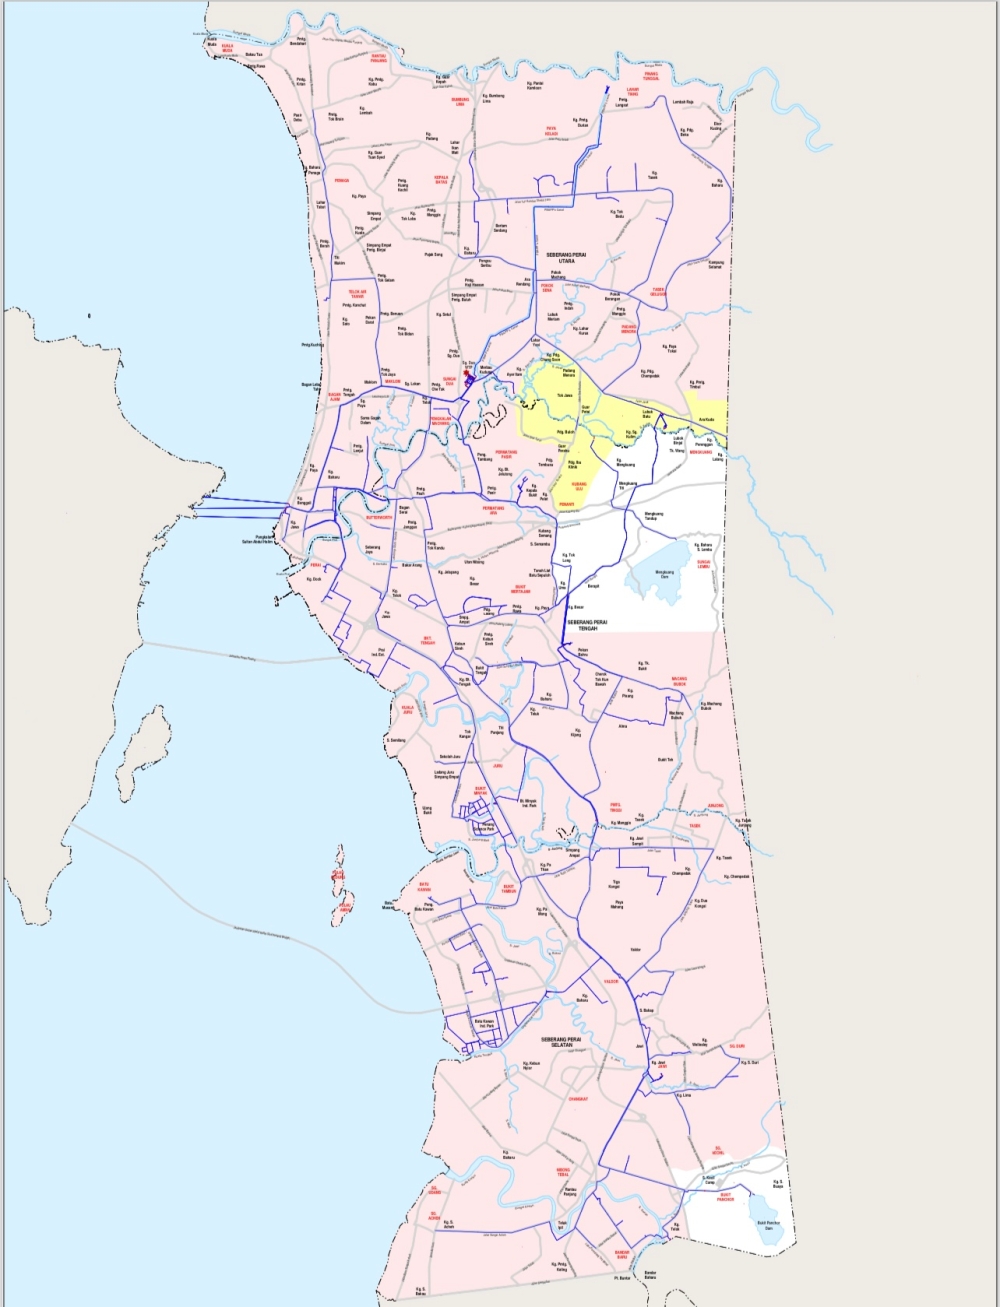 The pink areas in Seberang Perai are the places affected by the water supply disruption from January 10 to 14. — Picture courtesy of PBAPP